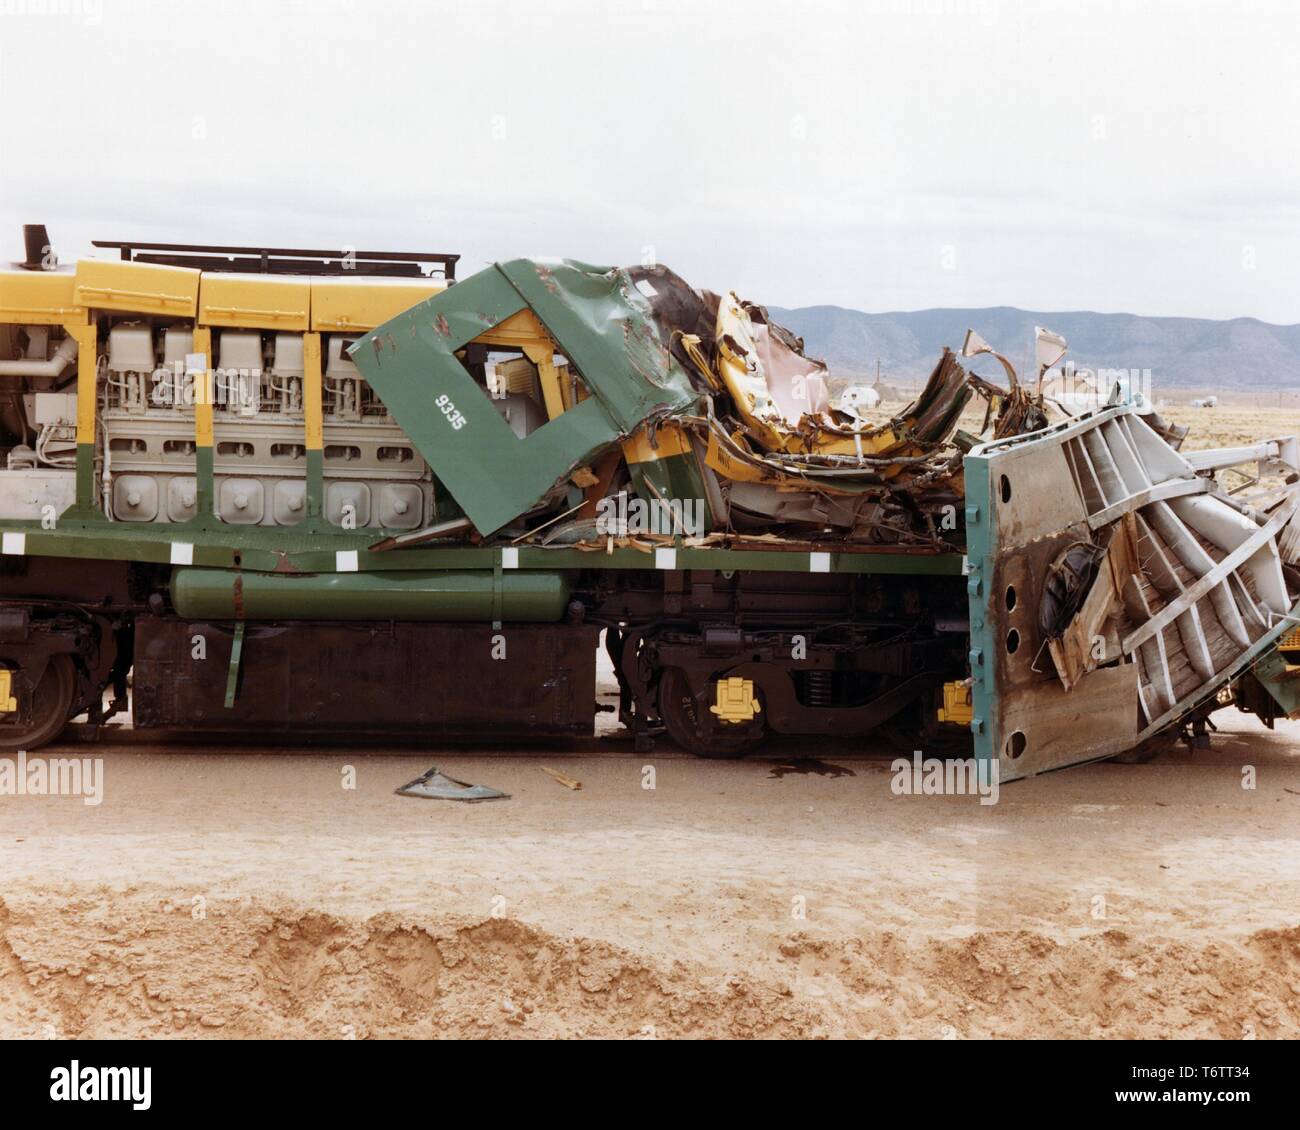 Profile view of a heavily damaged train engine after a collision with a tractor-trailer carrying a spent nuclear fuel cask during a crash test, Albuquerque, New Mexico, 1975. Image courtesy US Department of Energy. () Stock Photo